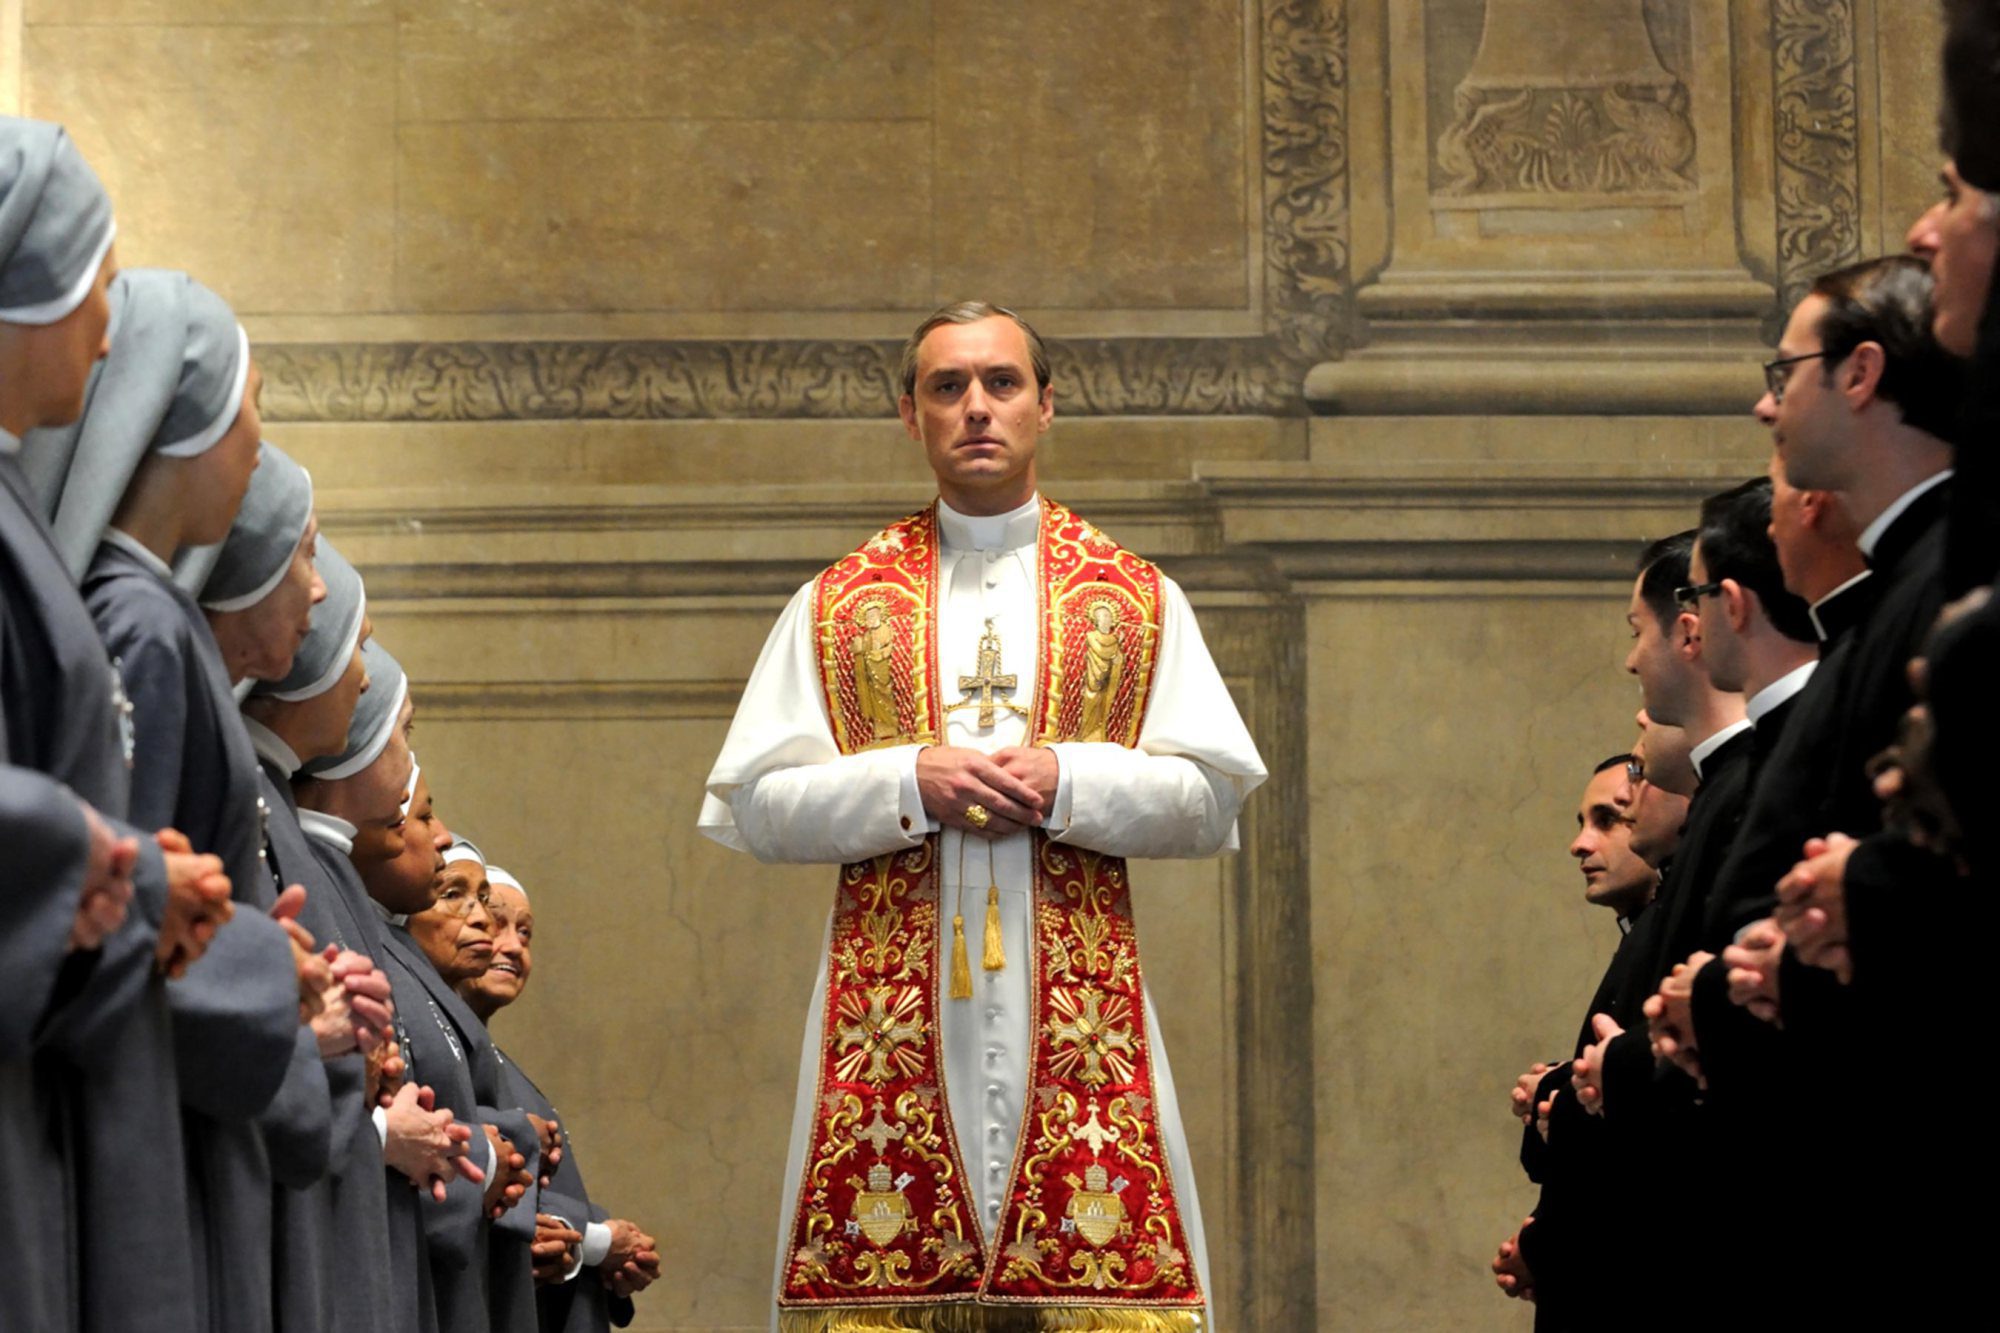 The Young Pope: “First Episode”